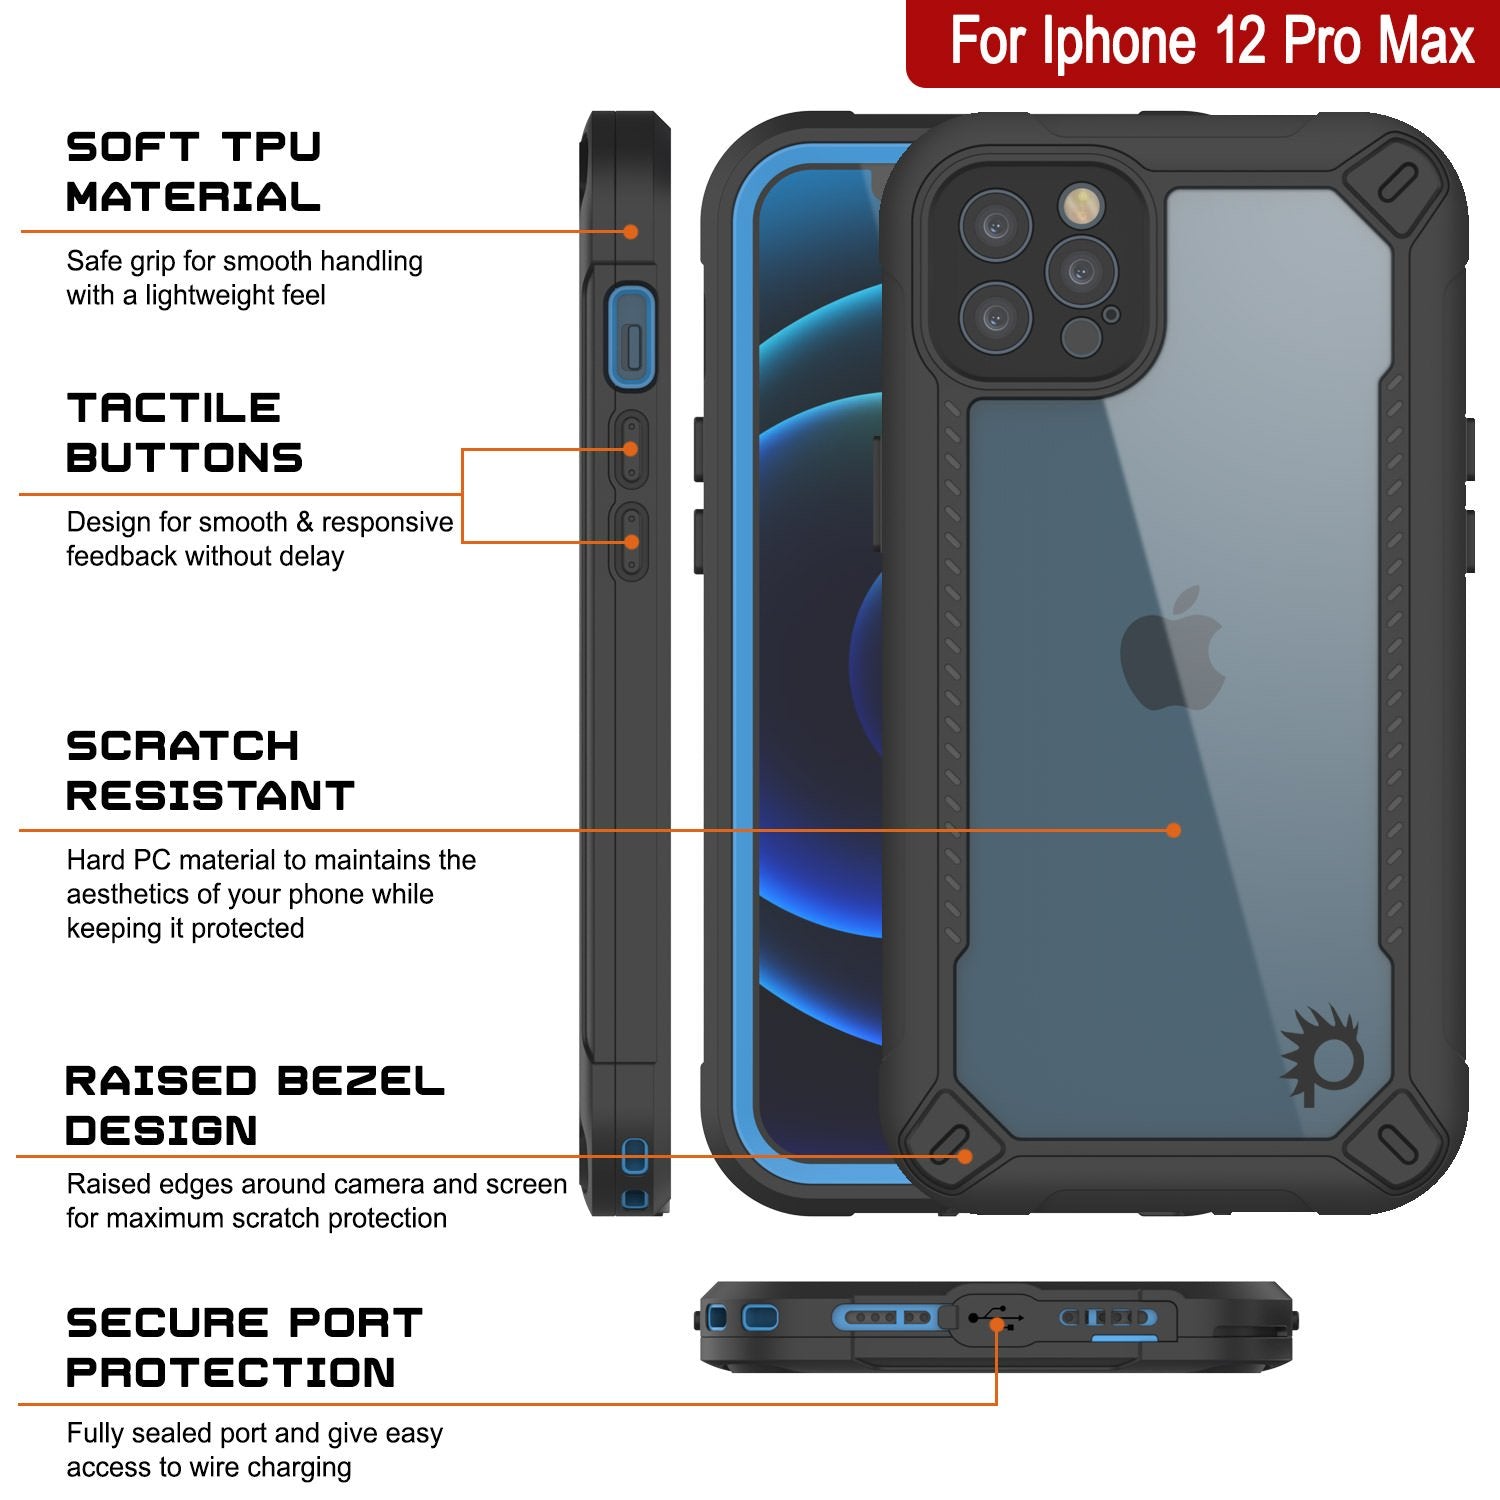 iPhone 12 Pro Max Waterproof IP68 Case, Punkcase [Blue]  [Maximus Series] [Slim Fit] [IP68 Certified] [Shockresistant] Clear Armor Cover with Screen Protector | Ultimate Protection